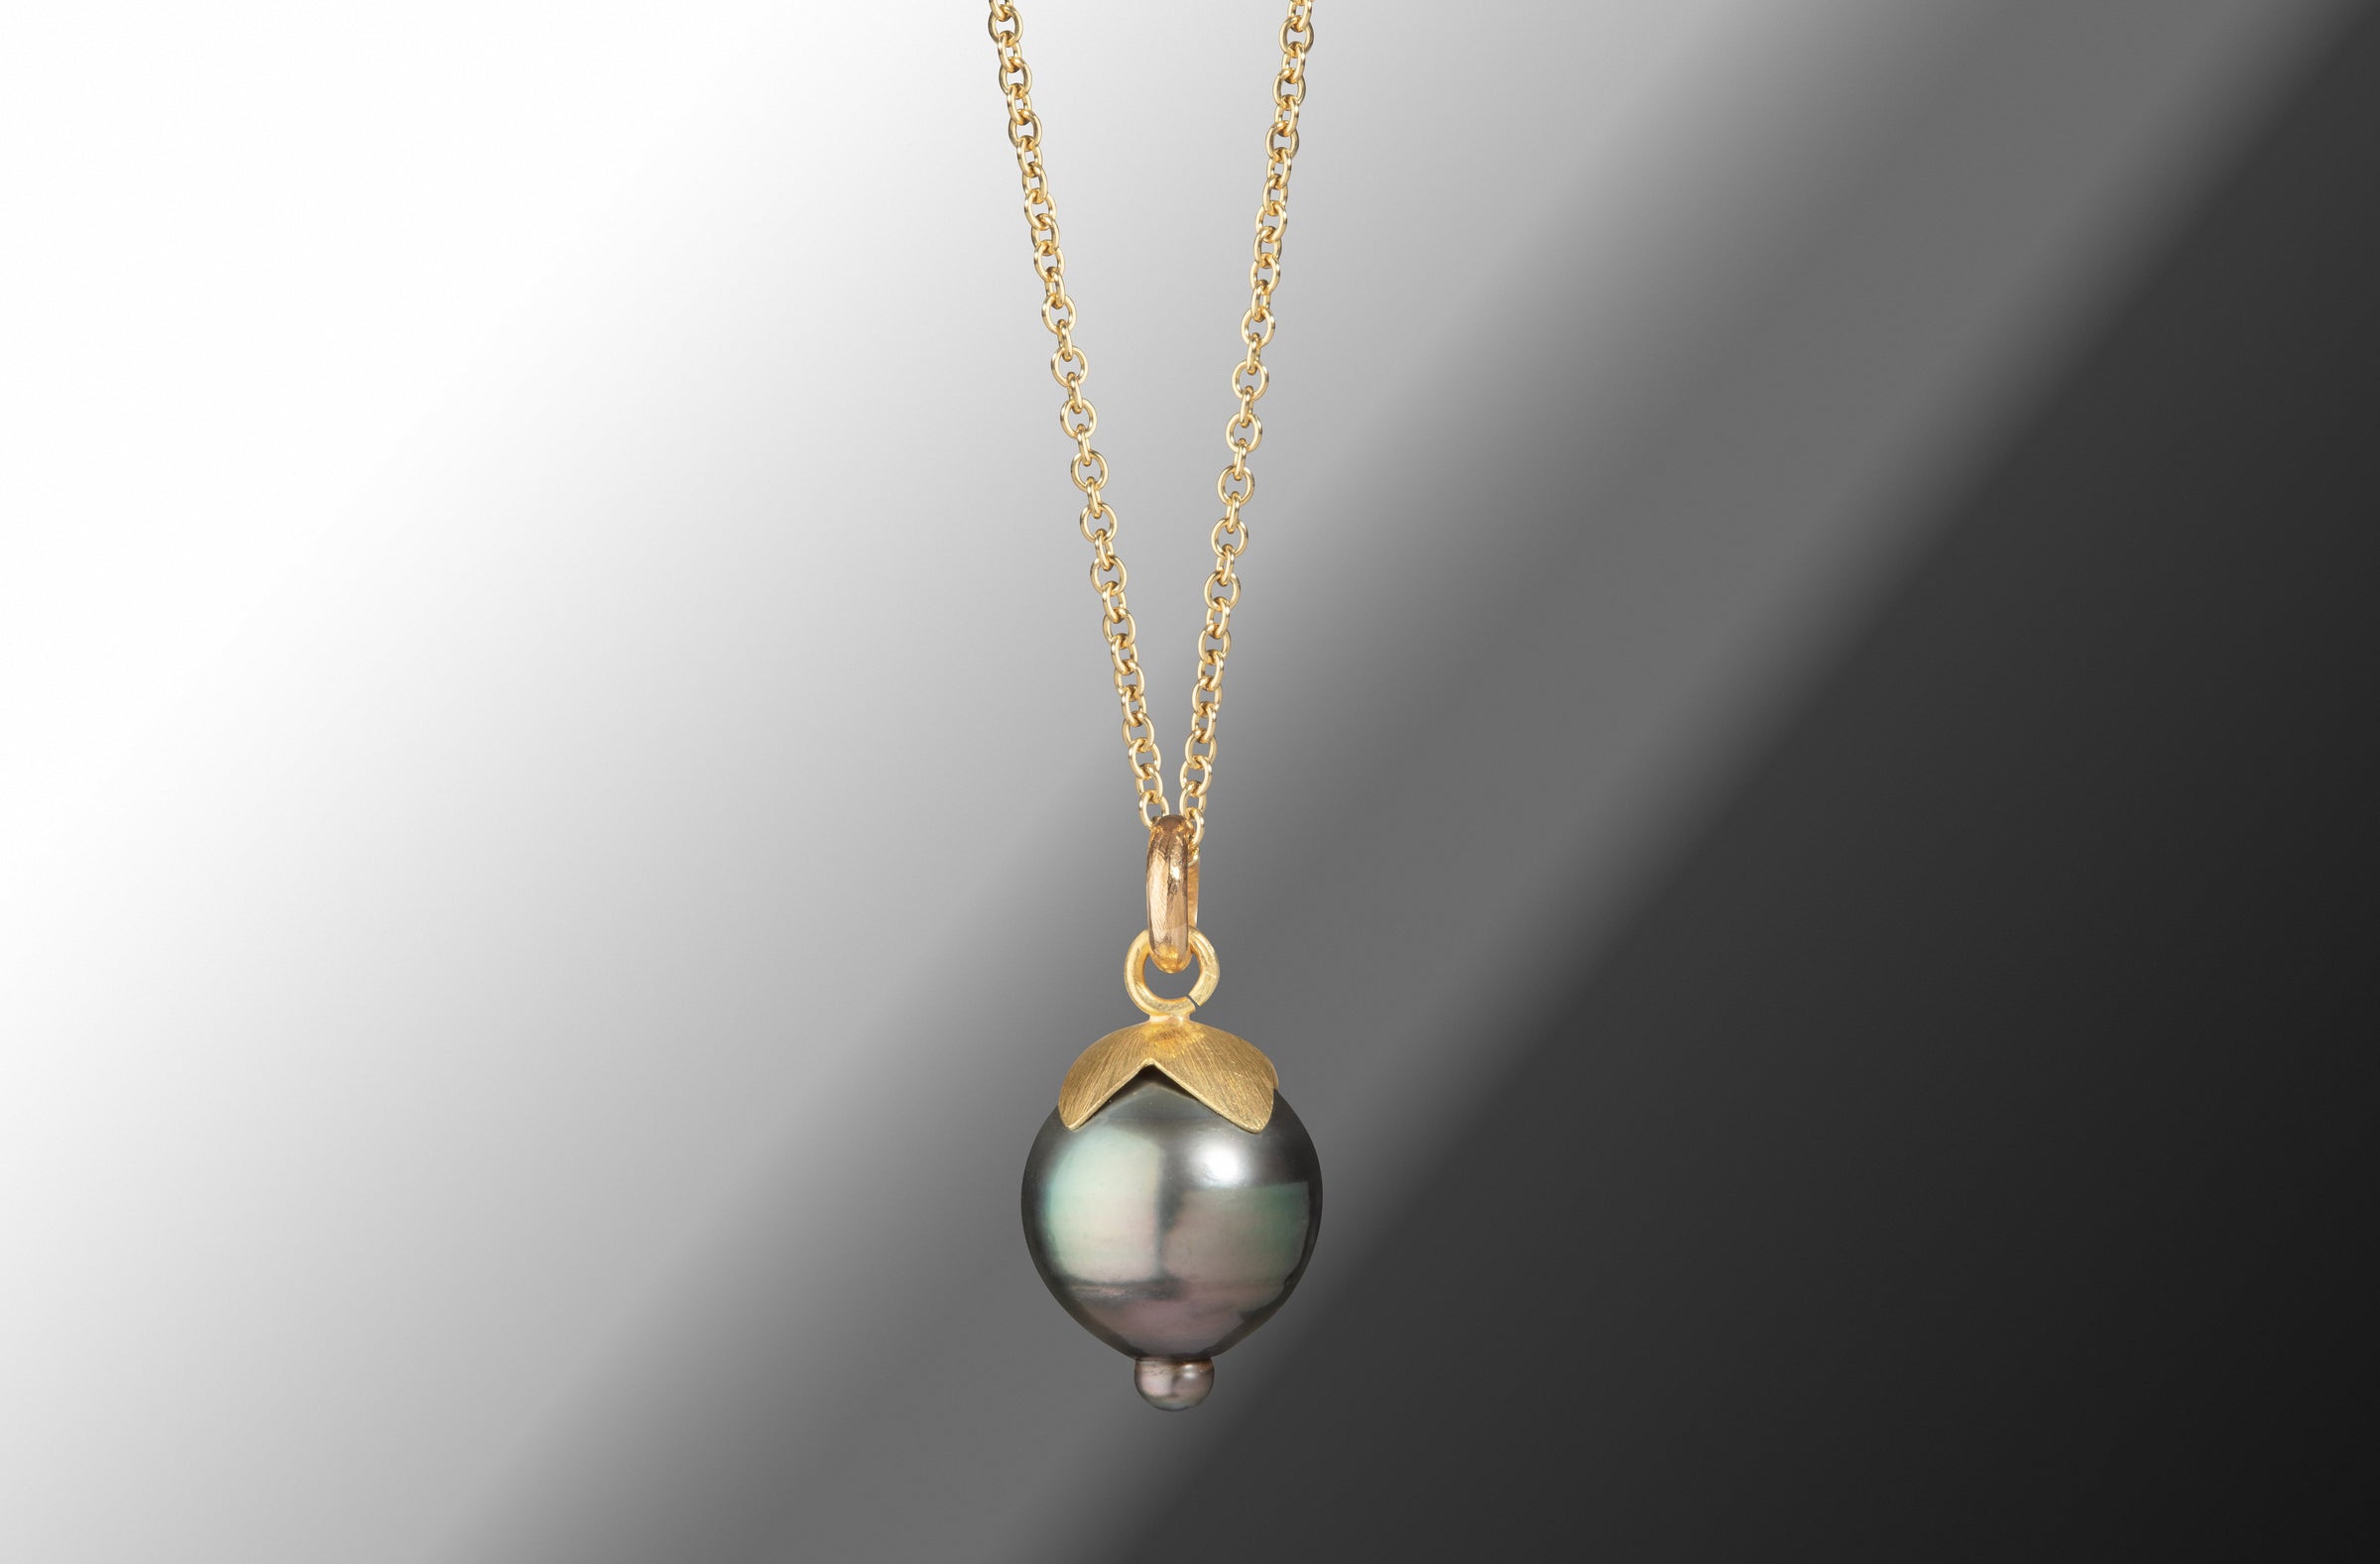 tahitian pearl pendant with 14K yellow gold cap. unique and handmade jewelry